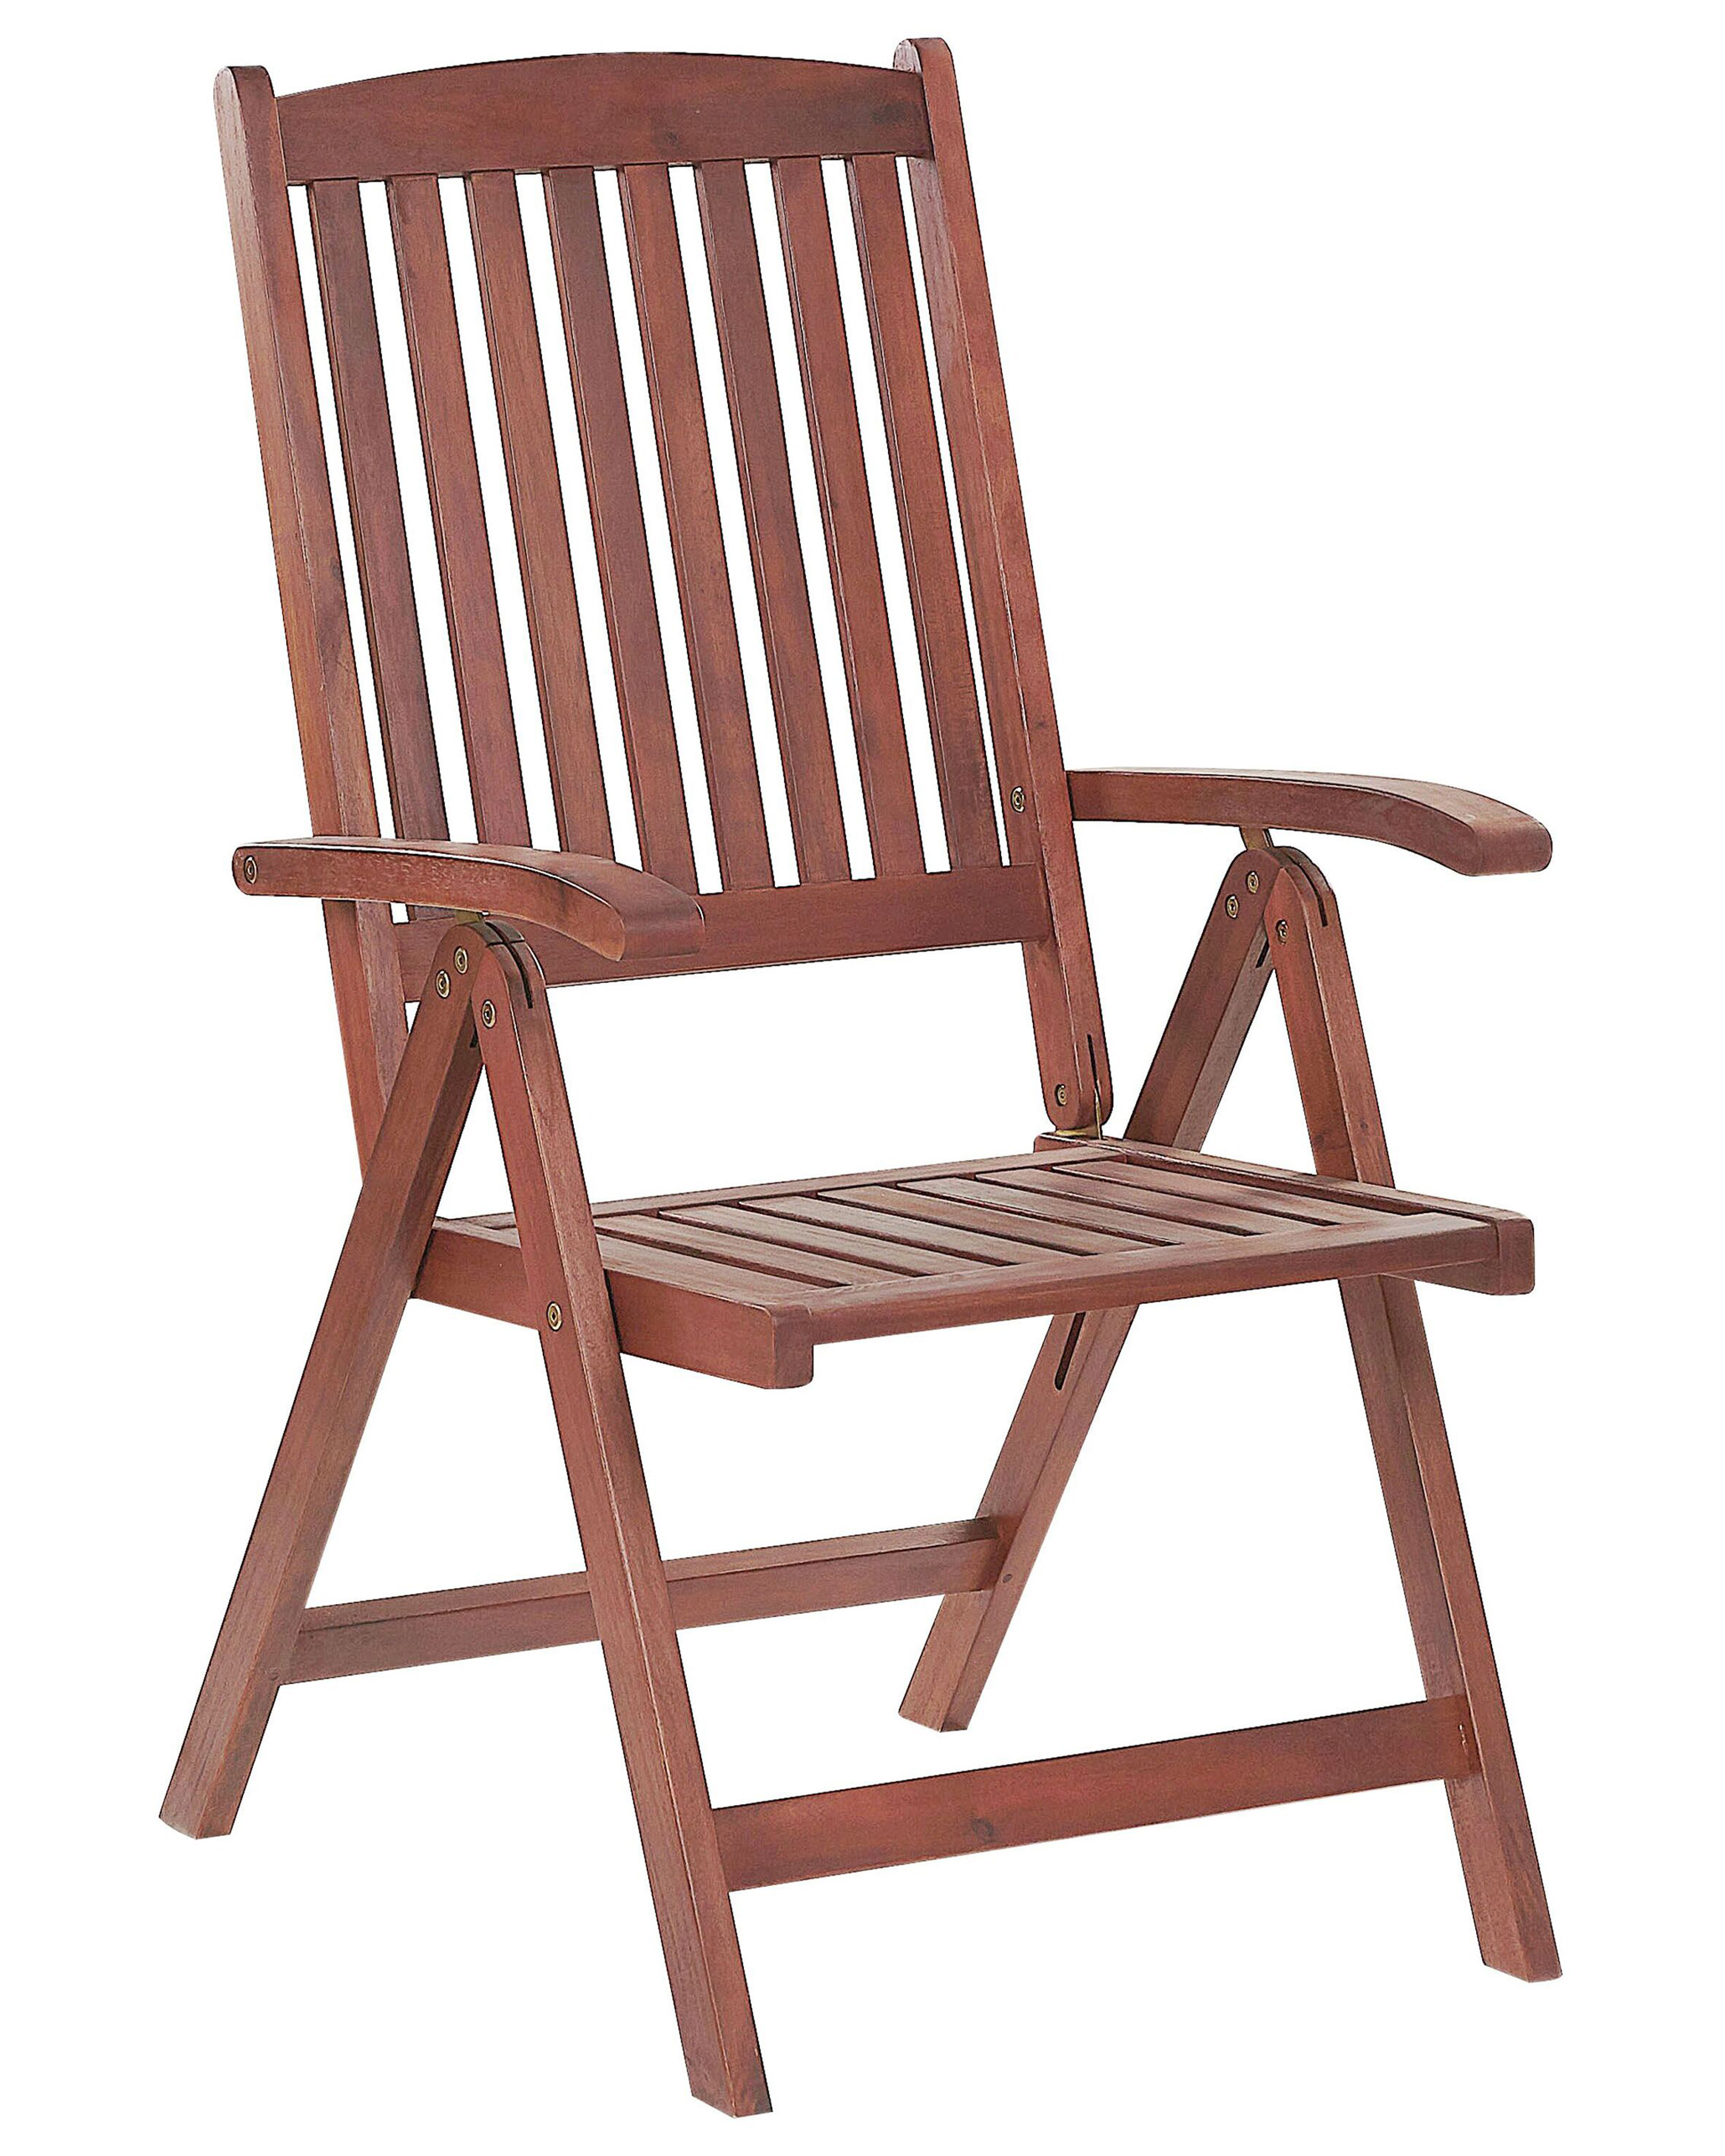 Set of 2 Acacia Wood Garden Chair Folding with Taupe Cushion TOSCANA_779705